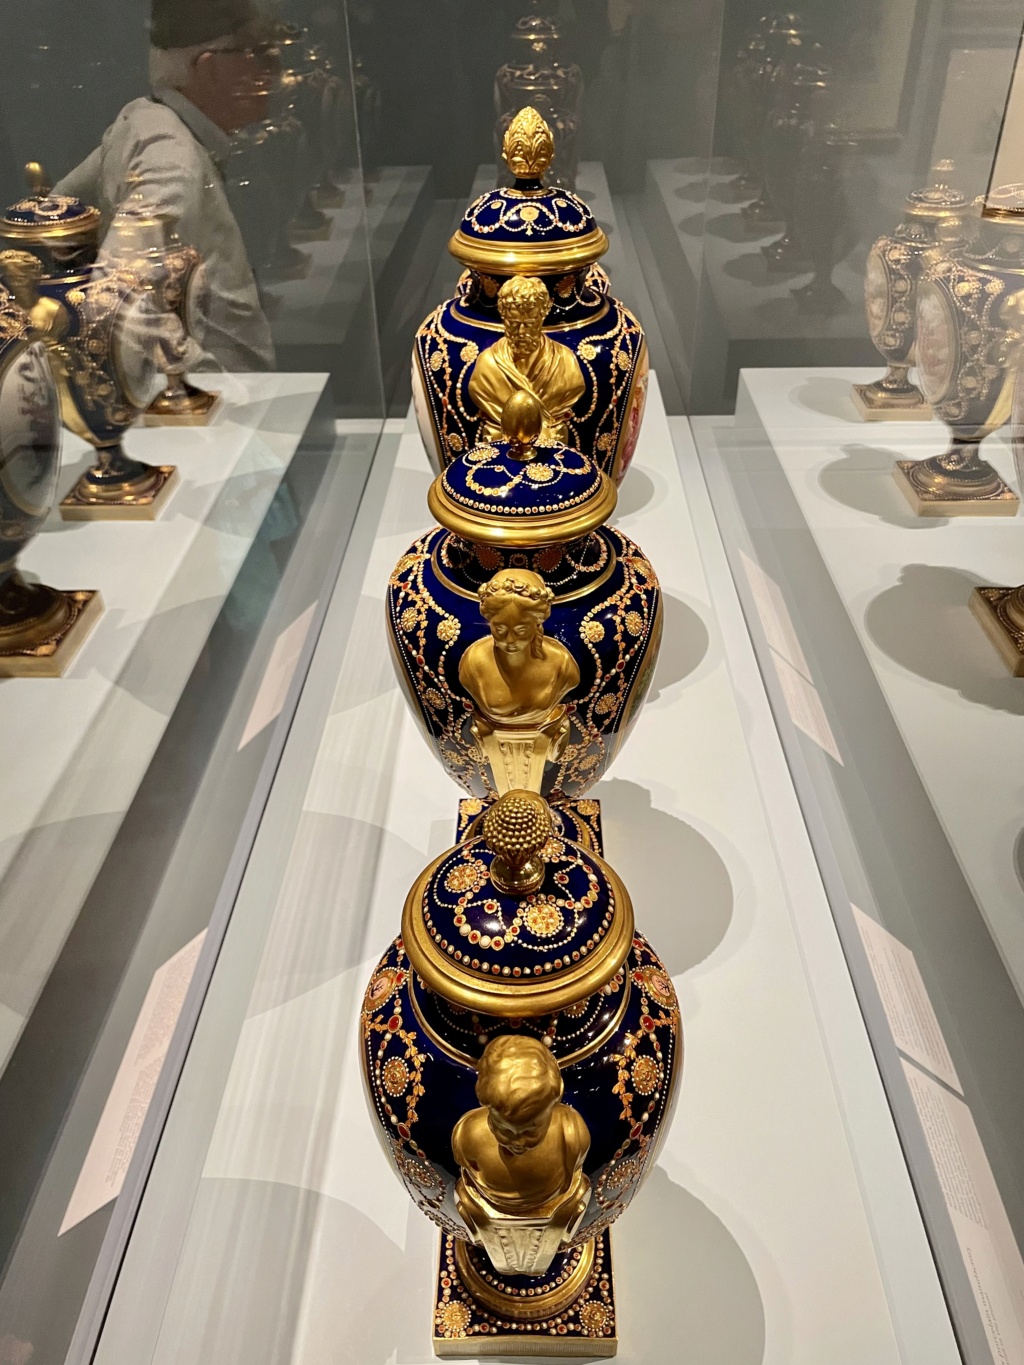 Exposition : Porcelain from Versailles Vases for a King & Queen. Getty Center, Los Angeles C84aad10